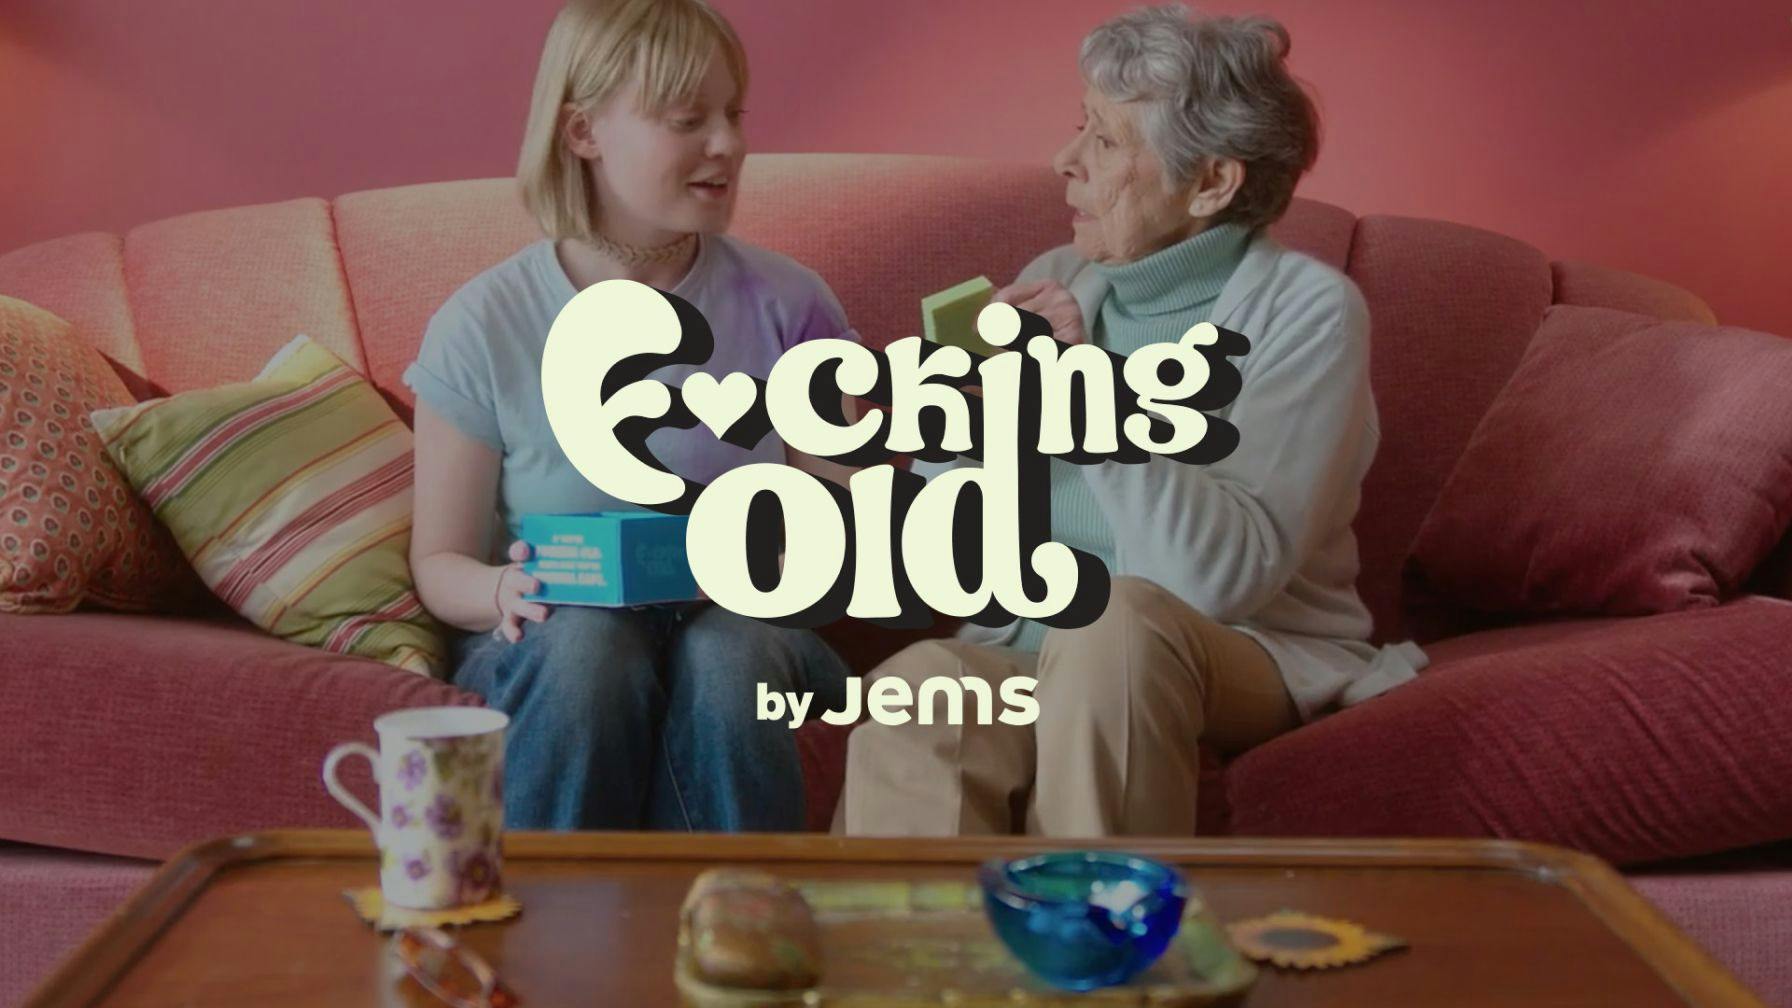 Dentsu Creative x Jems for All, F*cking Old Campaign